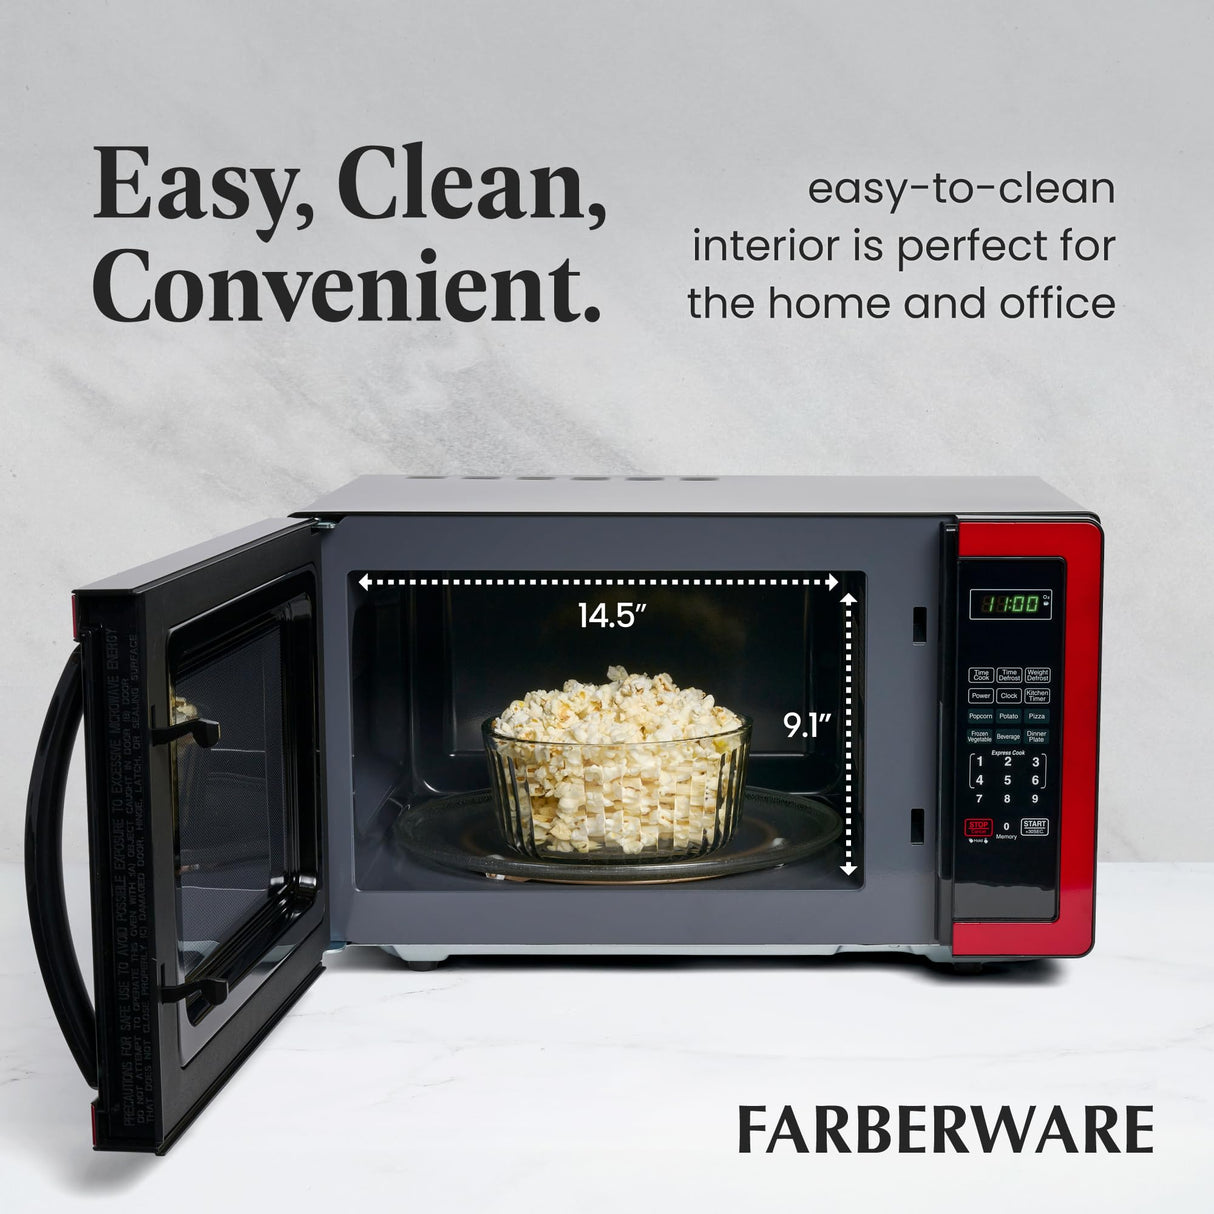 Farberware Countertop Microwave 1000 Watts, 1.1 cu ft - Microwave Oven With LED Lighting and Child Lock - Perfect for Apartments and Dorms - Easy Clean Metallic Red